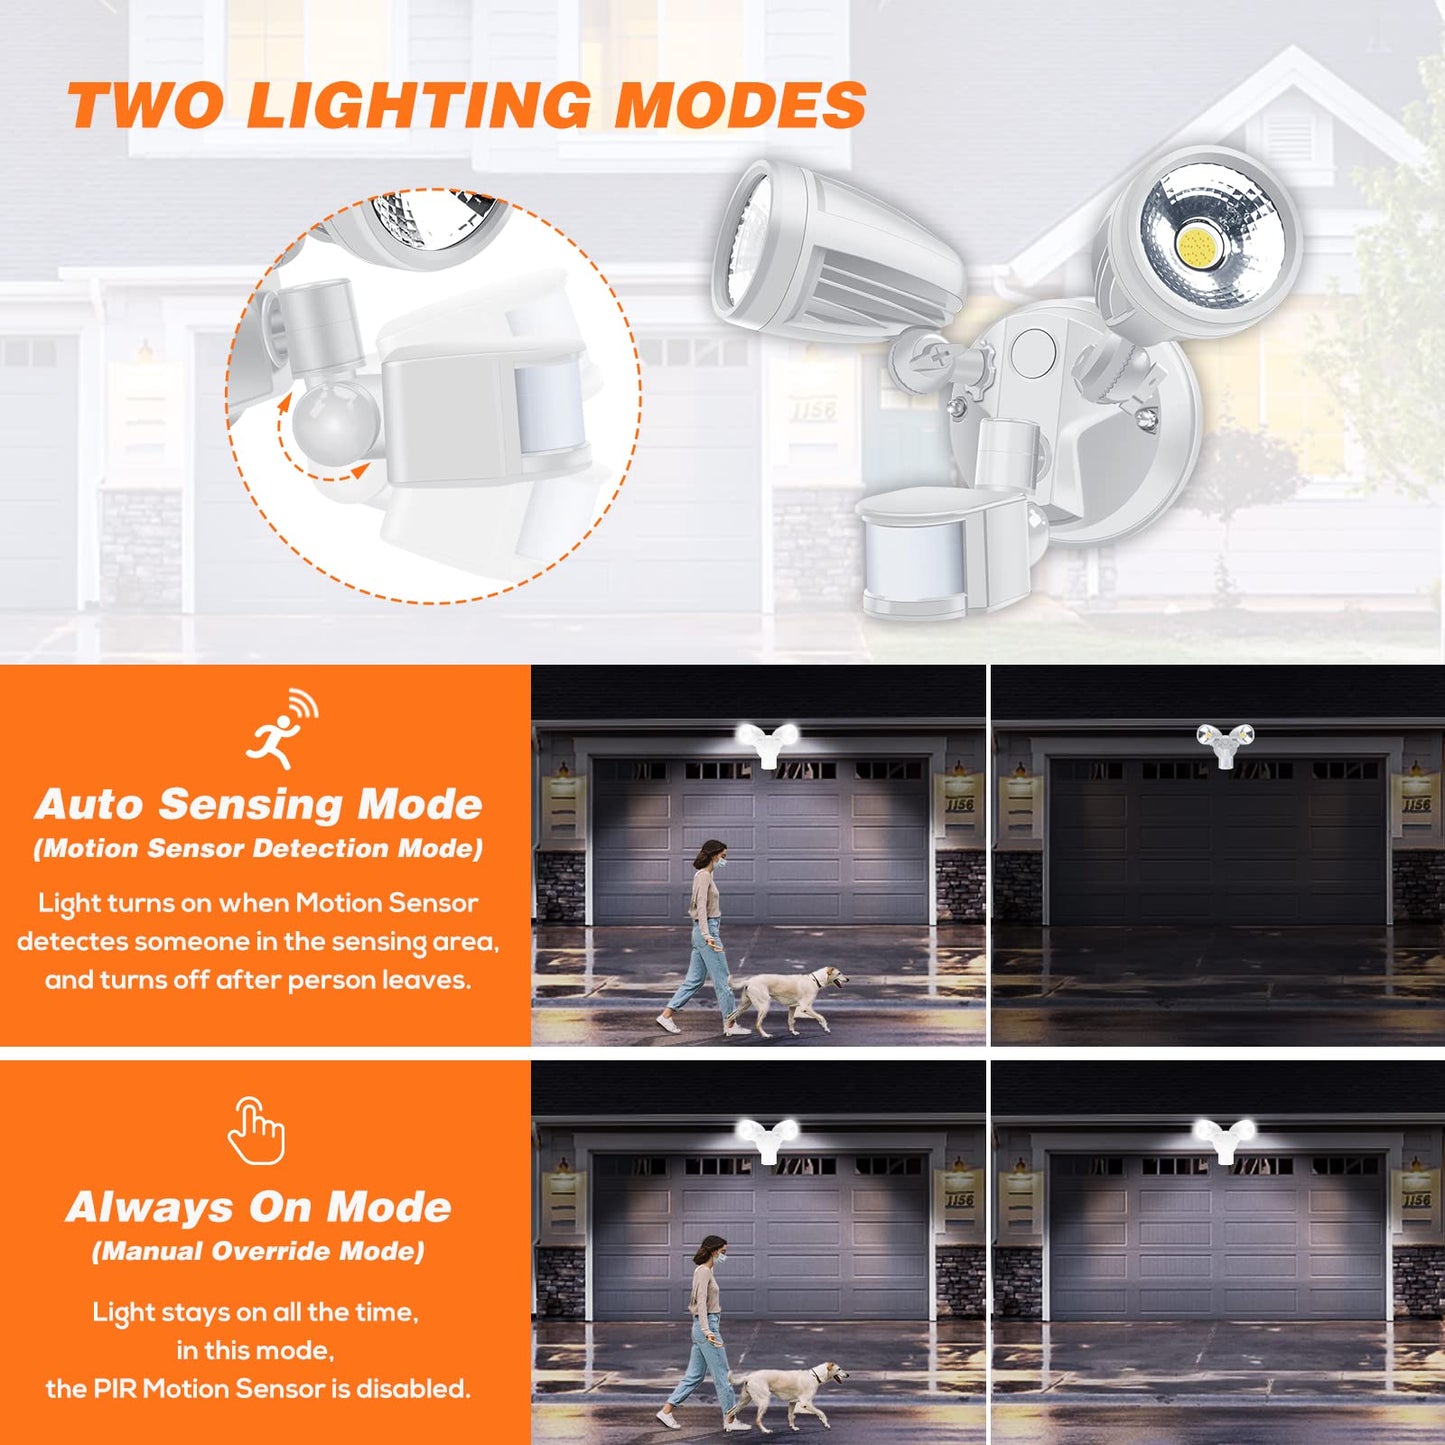 30W LED Outdoor Security Light with Motion Sensor 3CCT IP54 Waterproof White